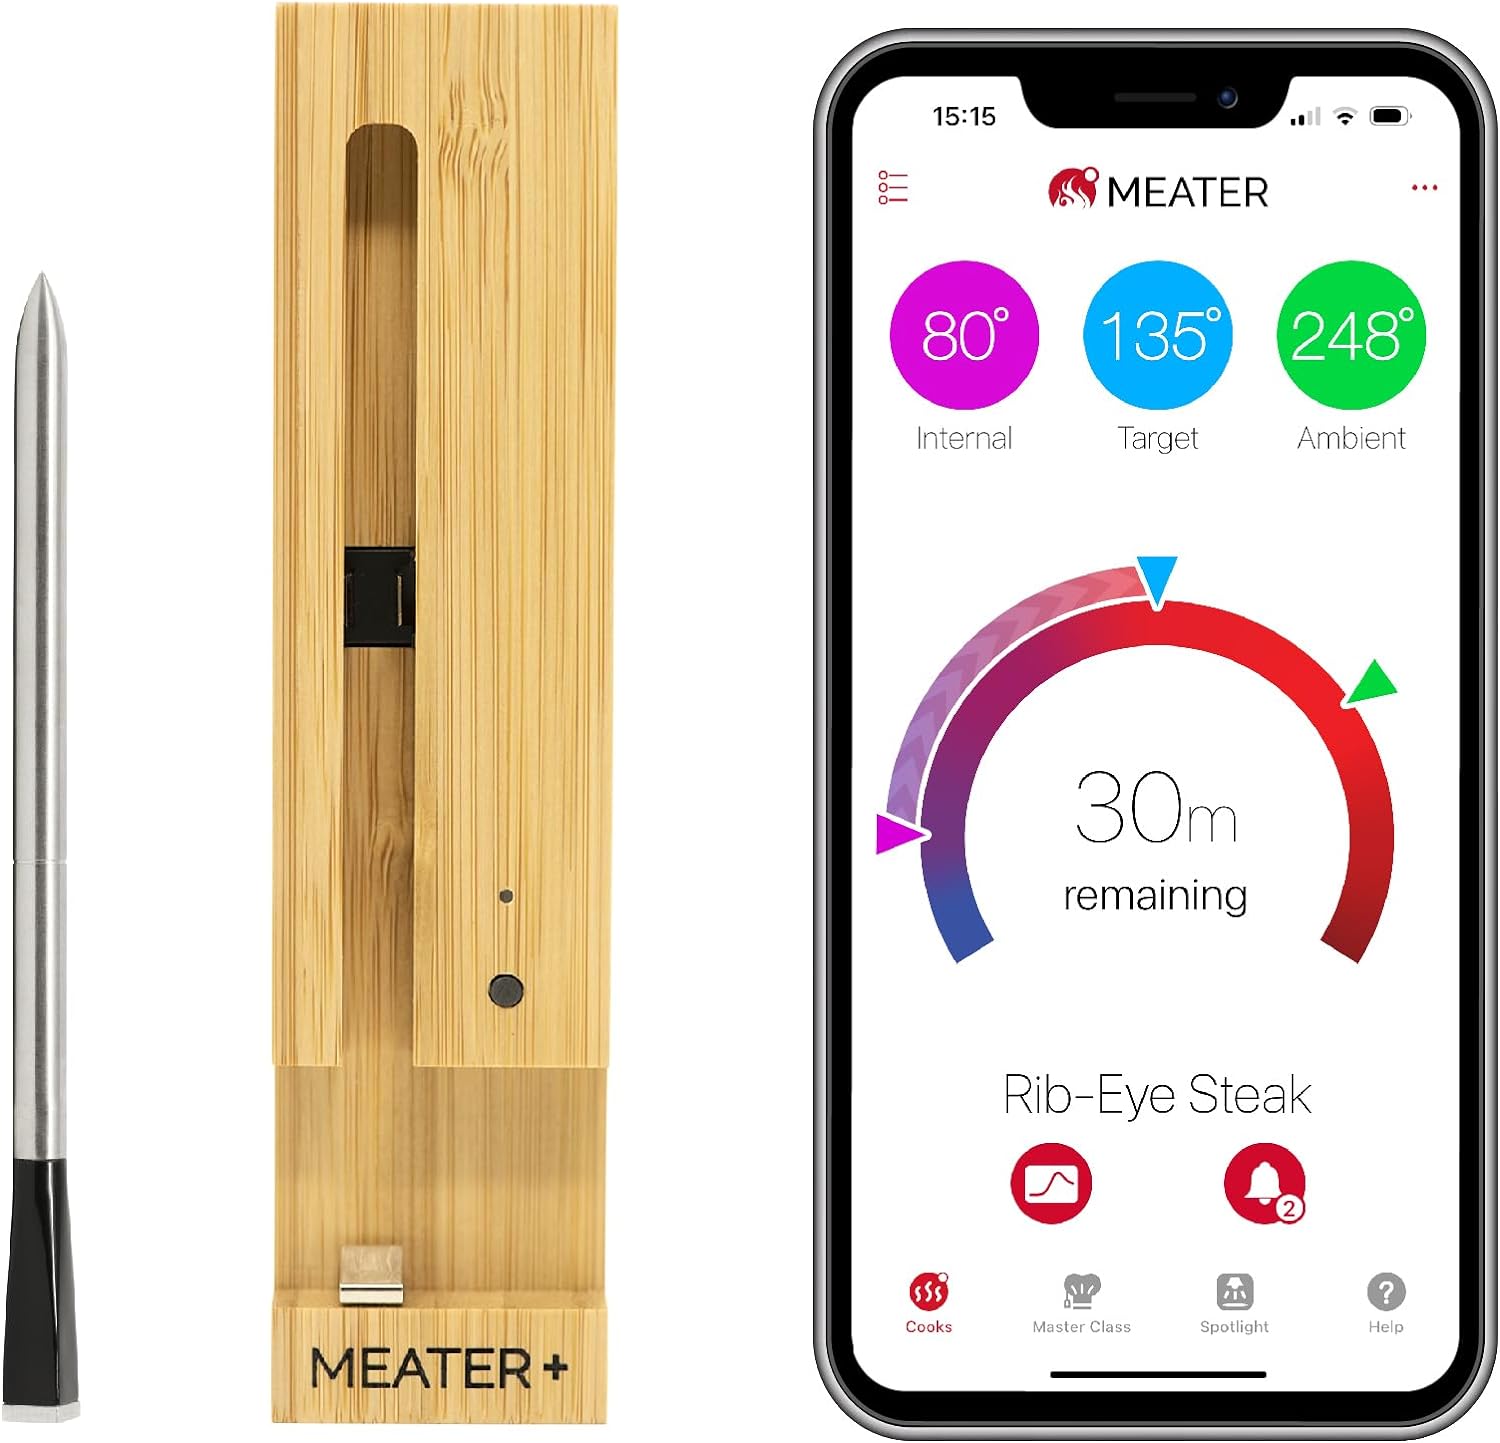 MEATER Plus: Long Range Wireless Smart Meat Thermometer with Bluetooth Booster | for BBQ, Oven, Grill, Kitchen, Smoker, Rotisserie | iOS & Android App